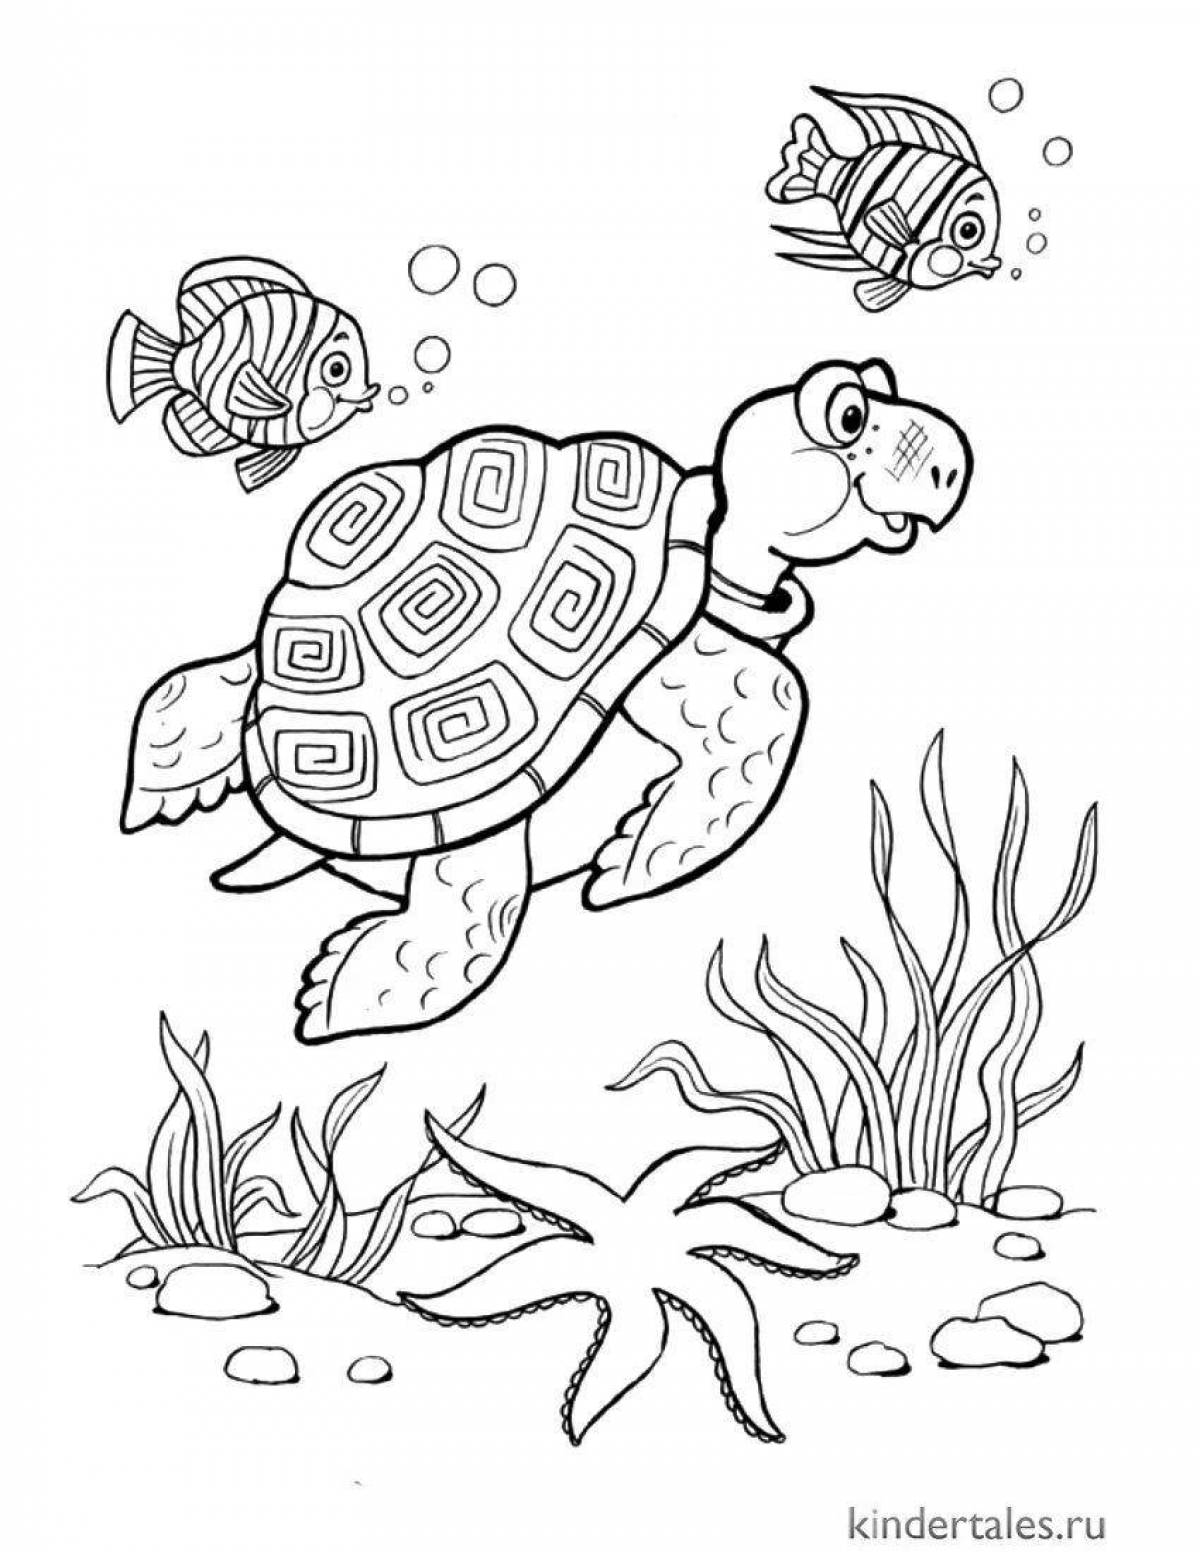 Glowing sea turtle coloring page